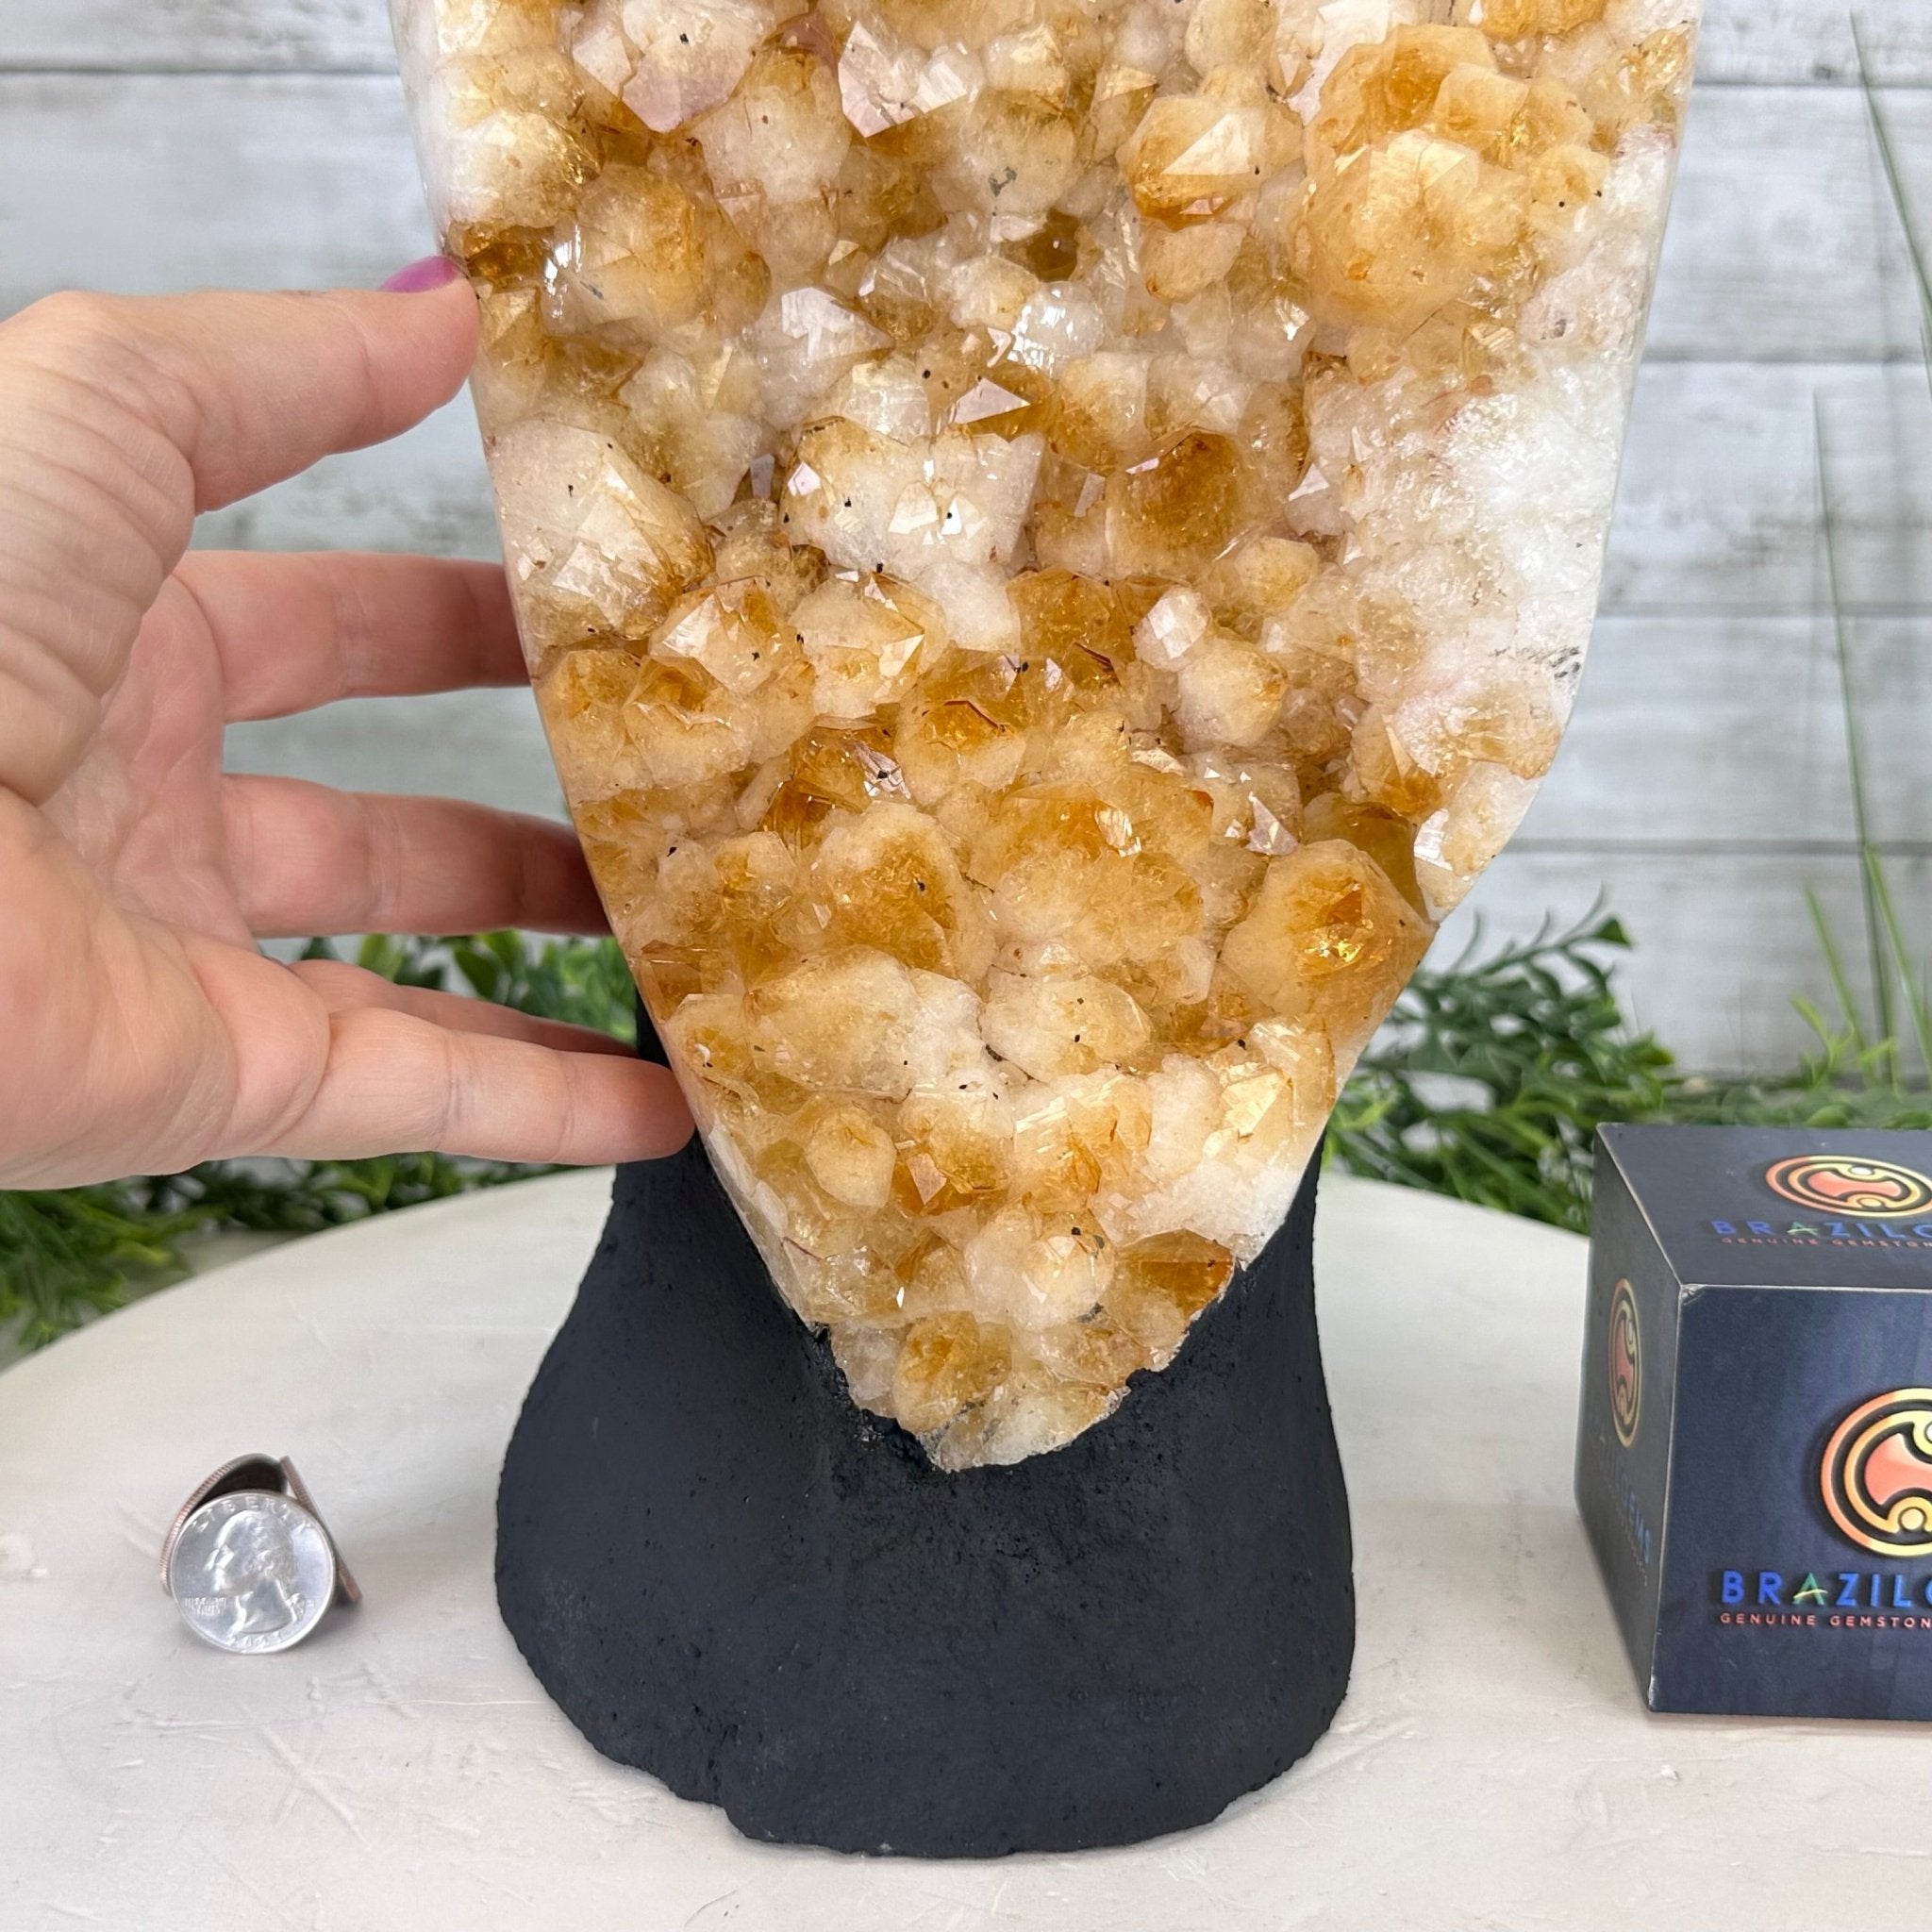 Extra Quality Citrine Cluster, Cement Base, 5.5" Tall #5615-0040 - Brazil GemsBrazil GemsExtra Quality Citrine Cluster, Cement Base, 5.5" Tall #5615-0040Clusters on Cement Bases5615-0040